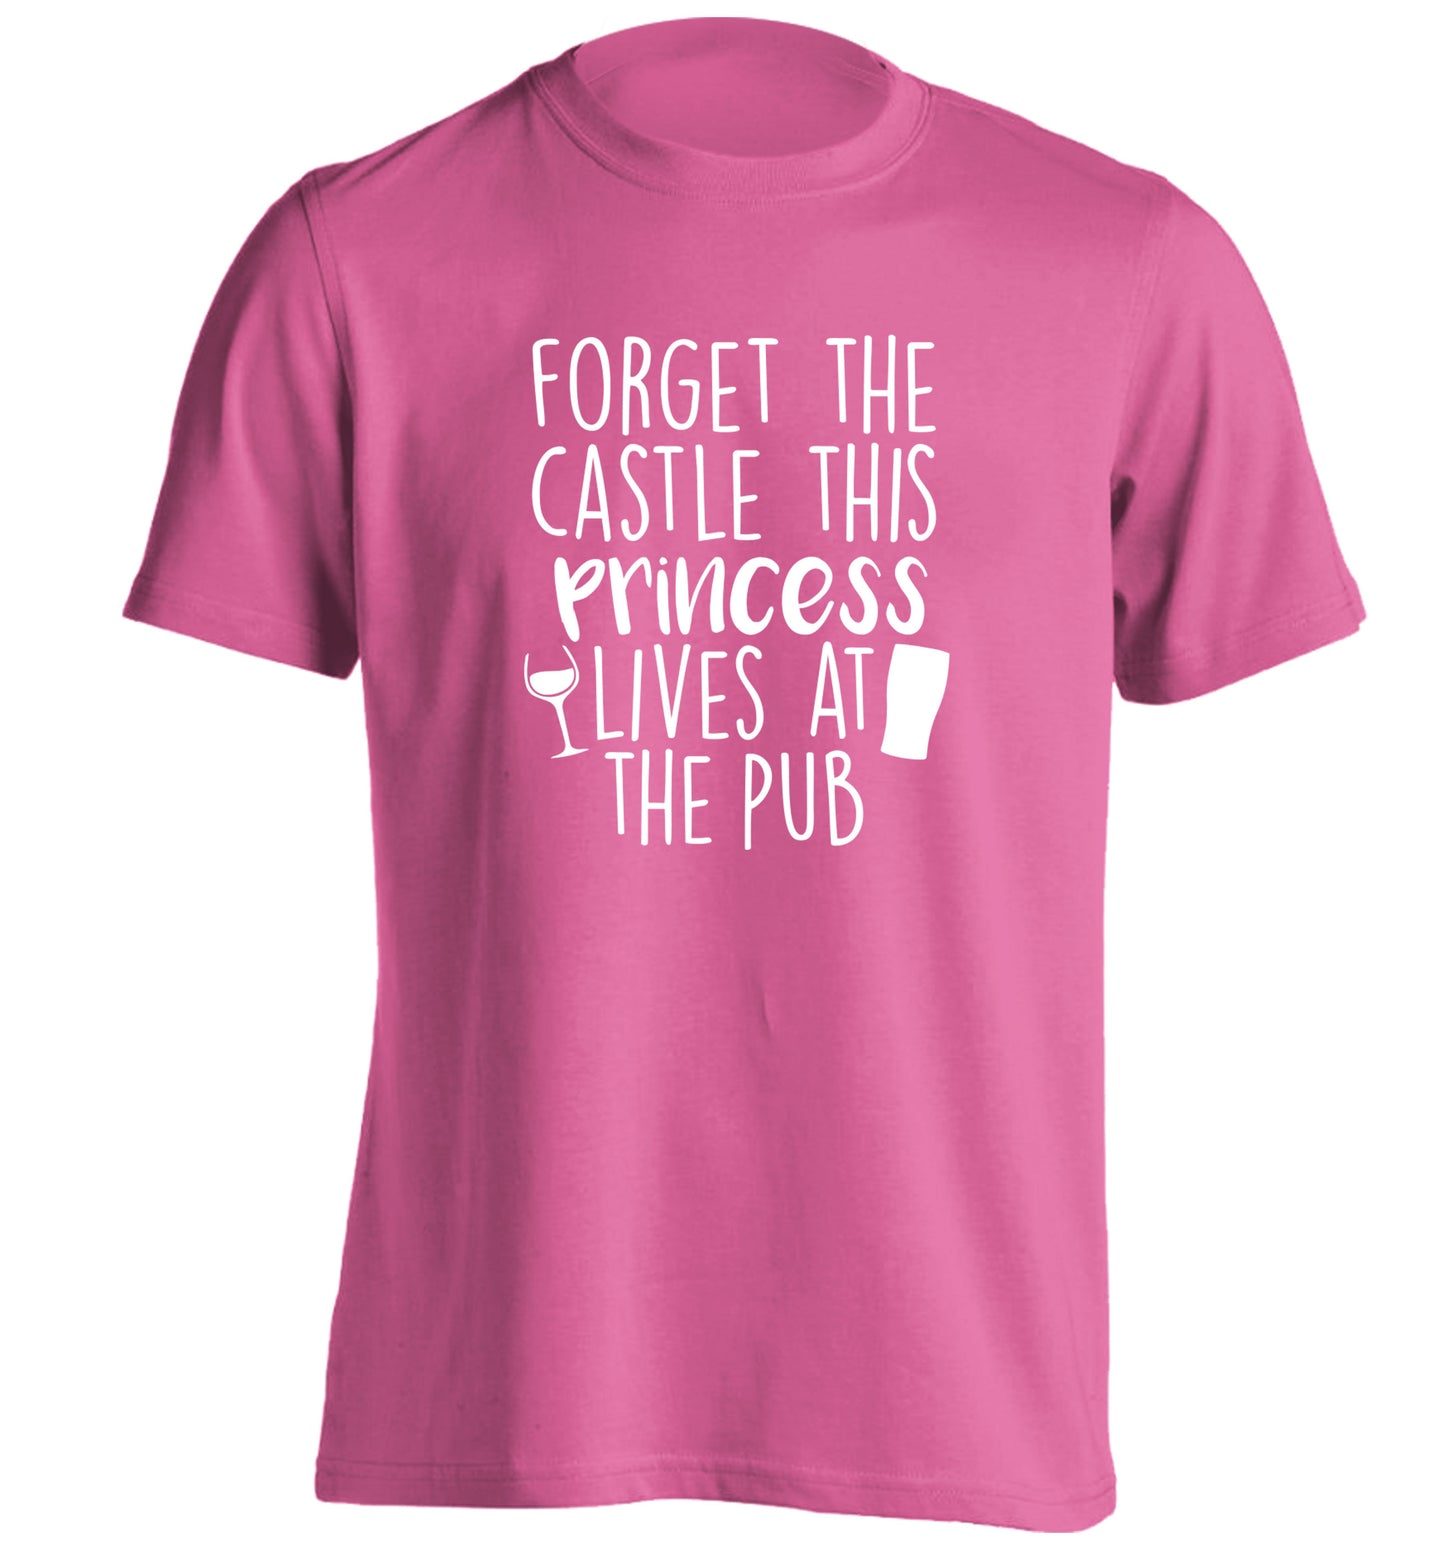 Forget the castle this princess lives at the pub adults unisex pink Tshirt 2XL